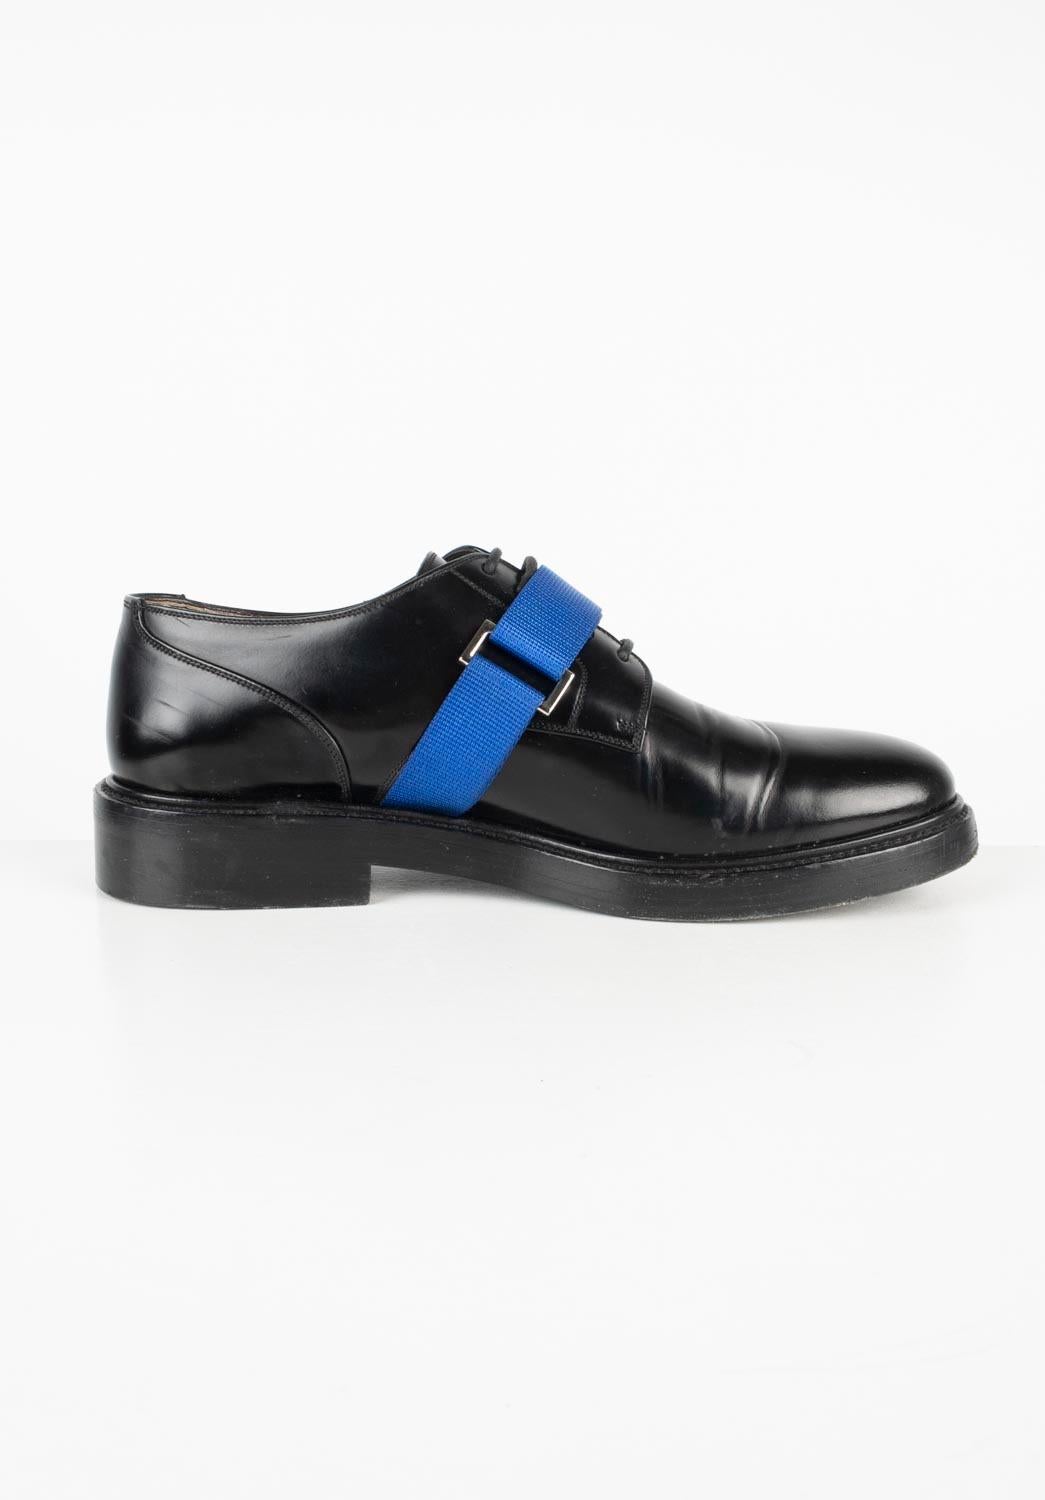 Dior Homme Men Shoes AW15 Derbies Size EUR 40 ½, S693 In Excellent Condition For Sale In Kaunas, LT